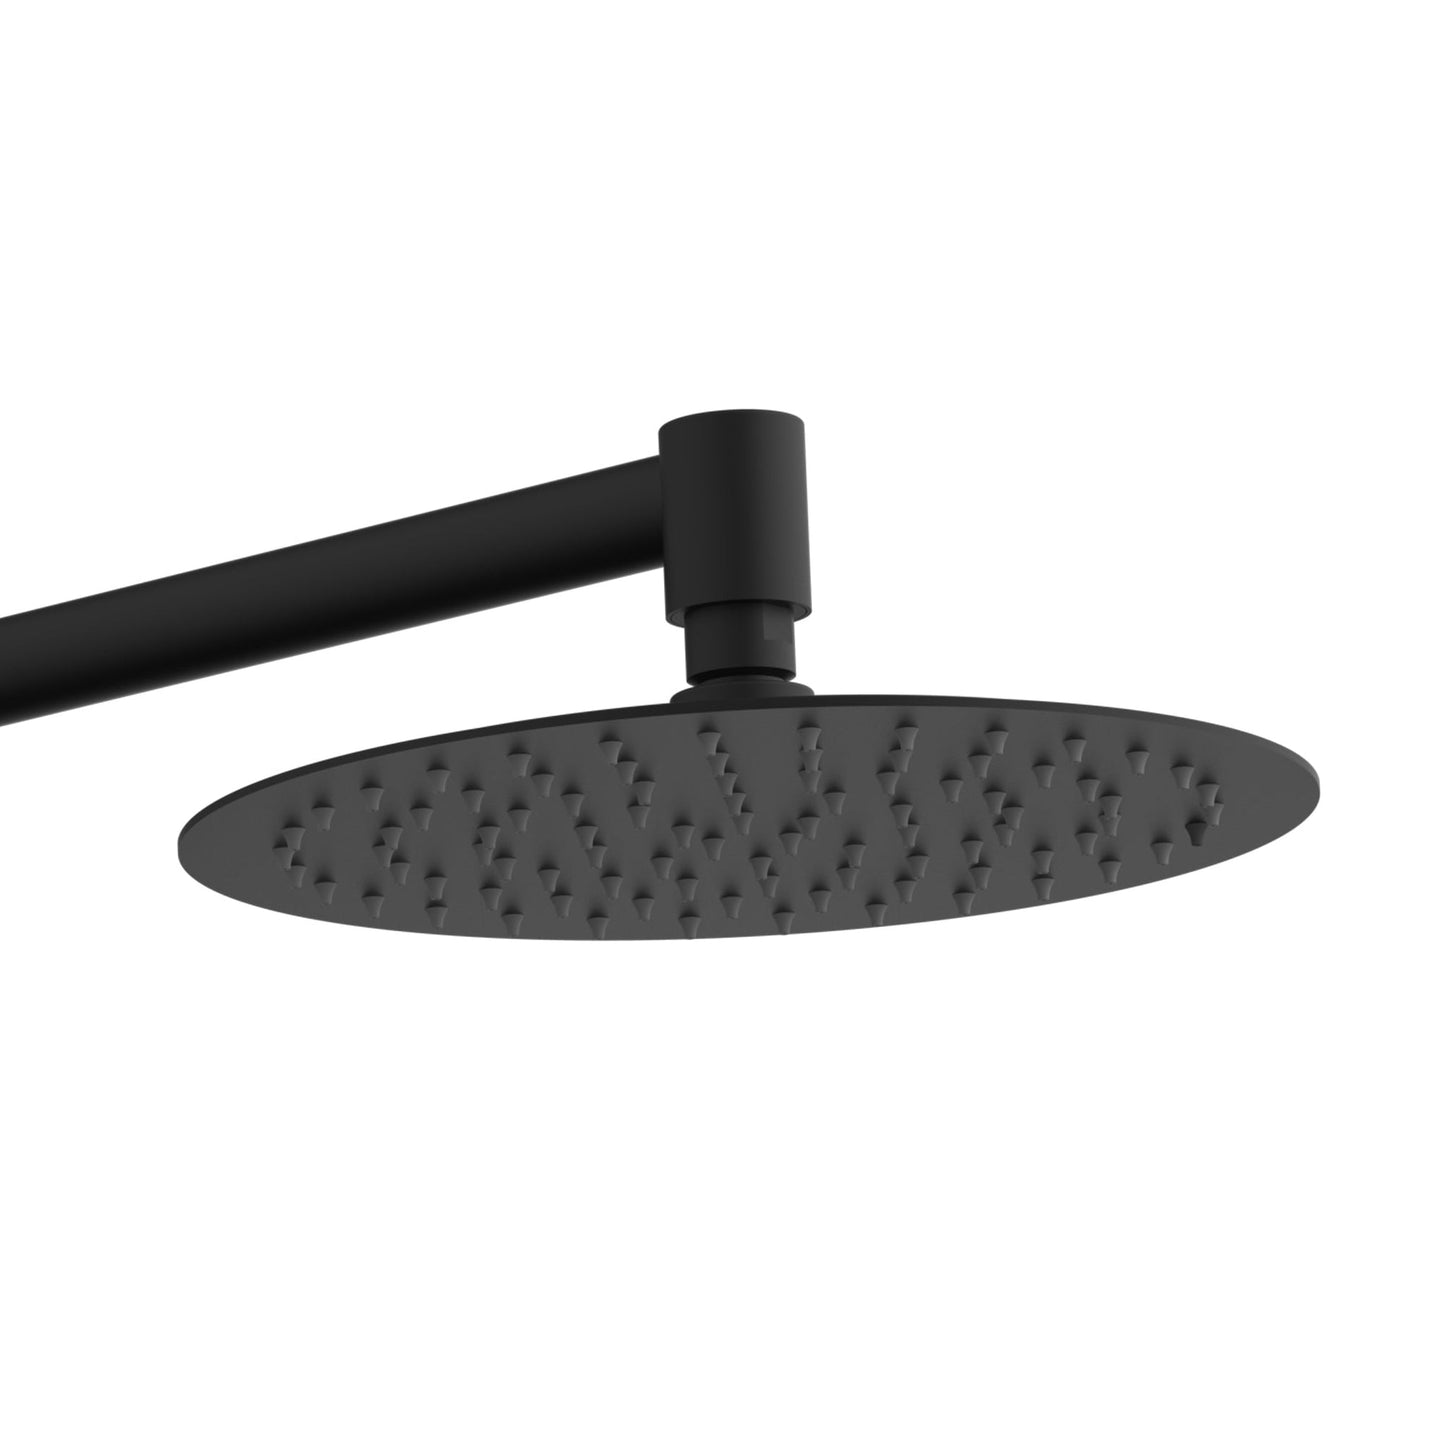 PULSE ShowerSpas Atlantis 2.5 GPM Rain Shower System in Matte Black Finish With 5-Power Nozzle and Single Function Hand Shower